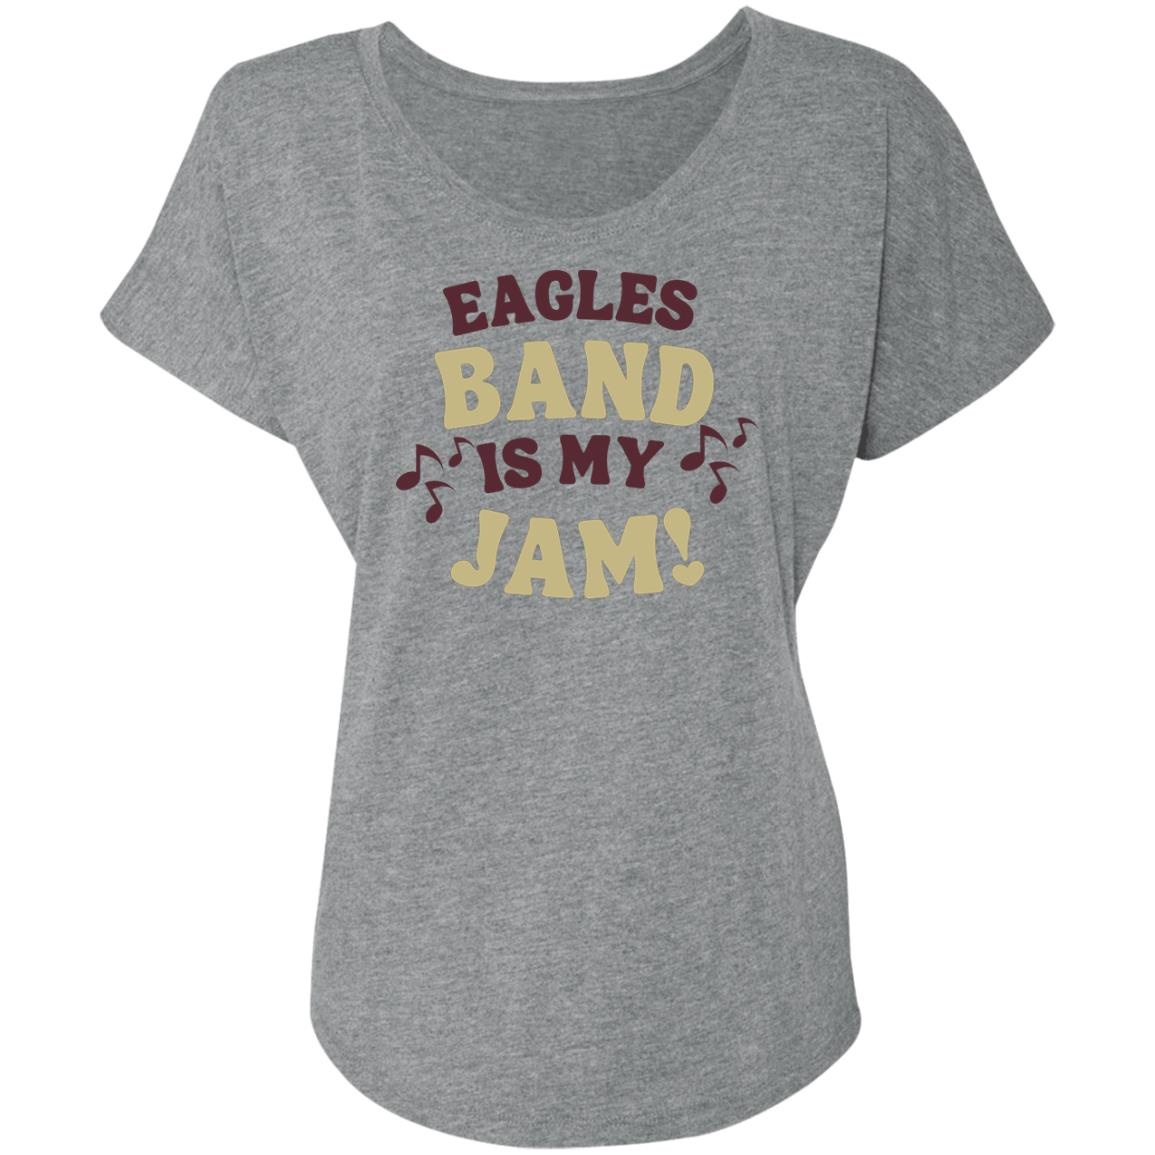 Women's Super Soft Band Jam Dolman Graphic Tee - New Albany Eagles